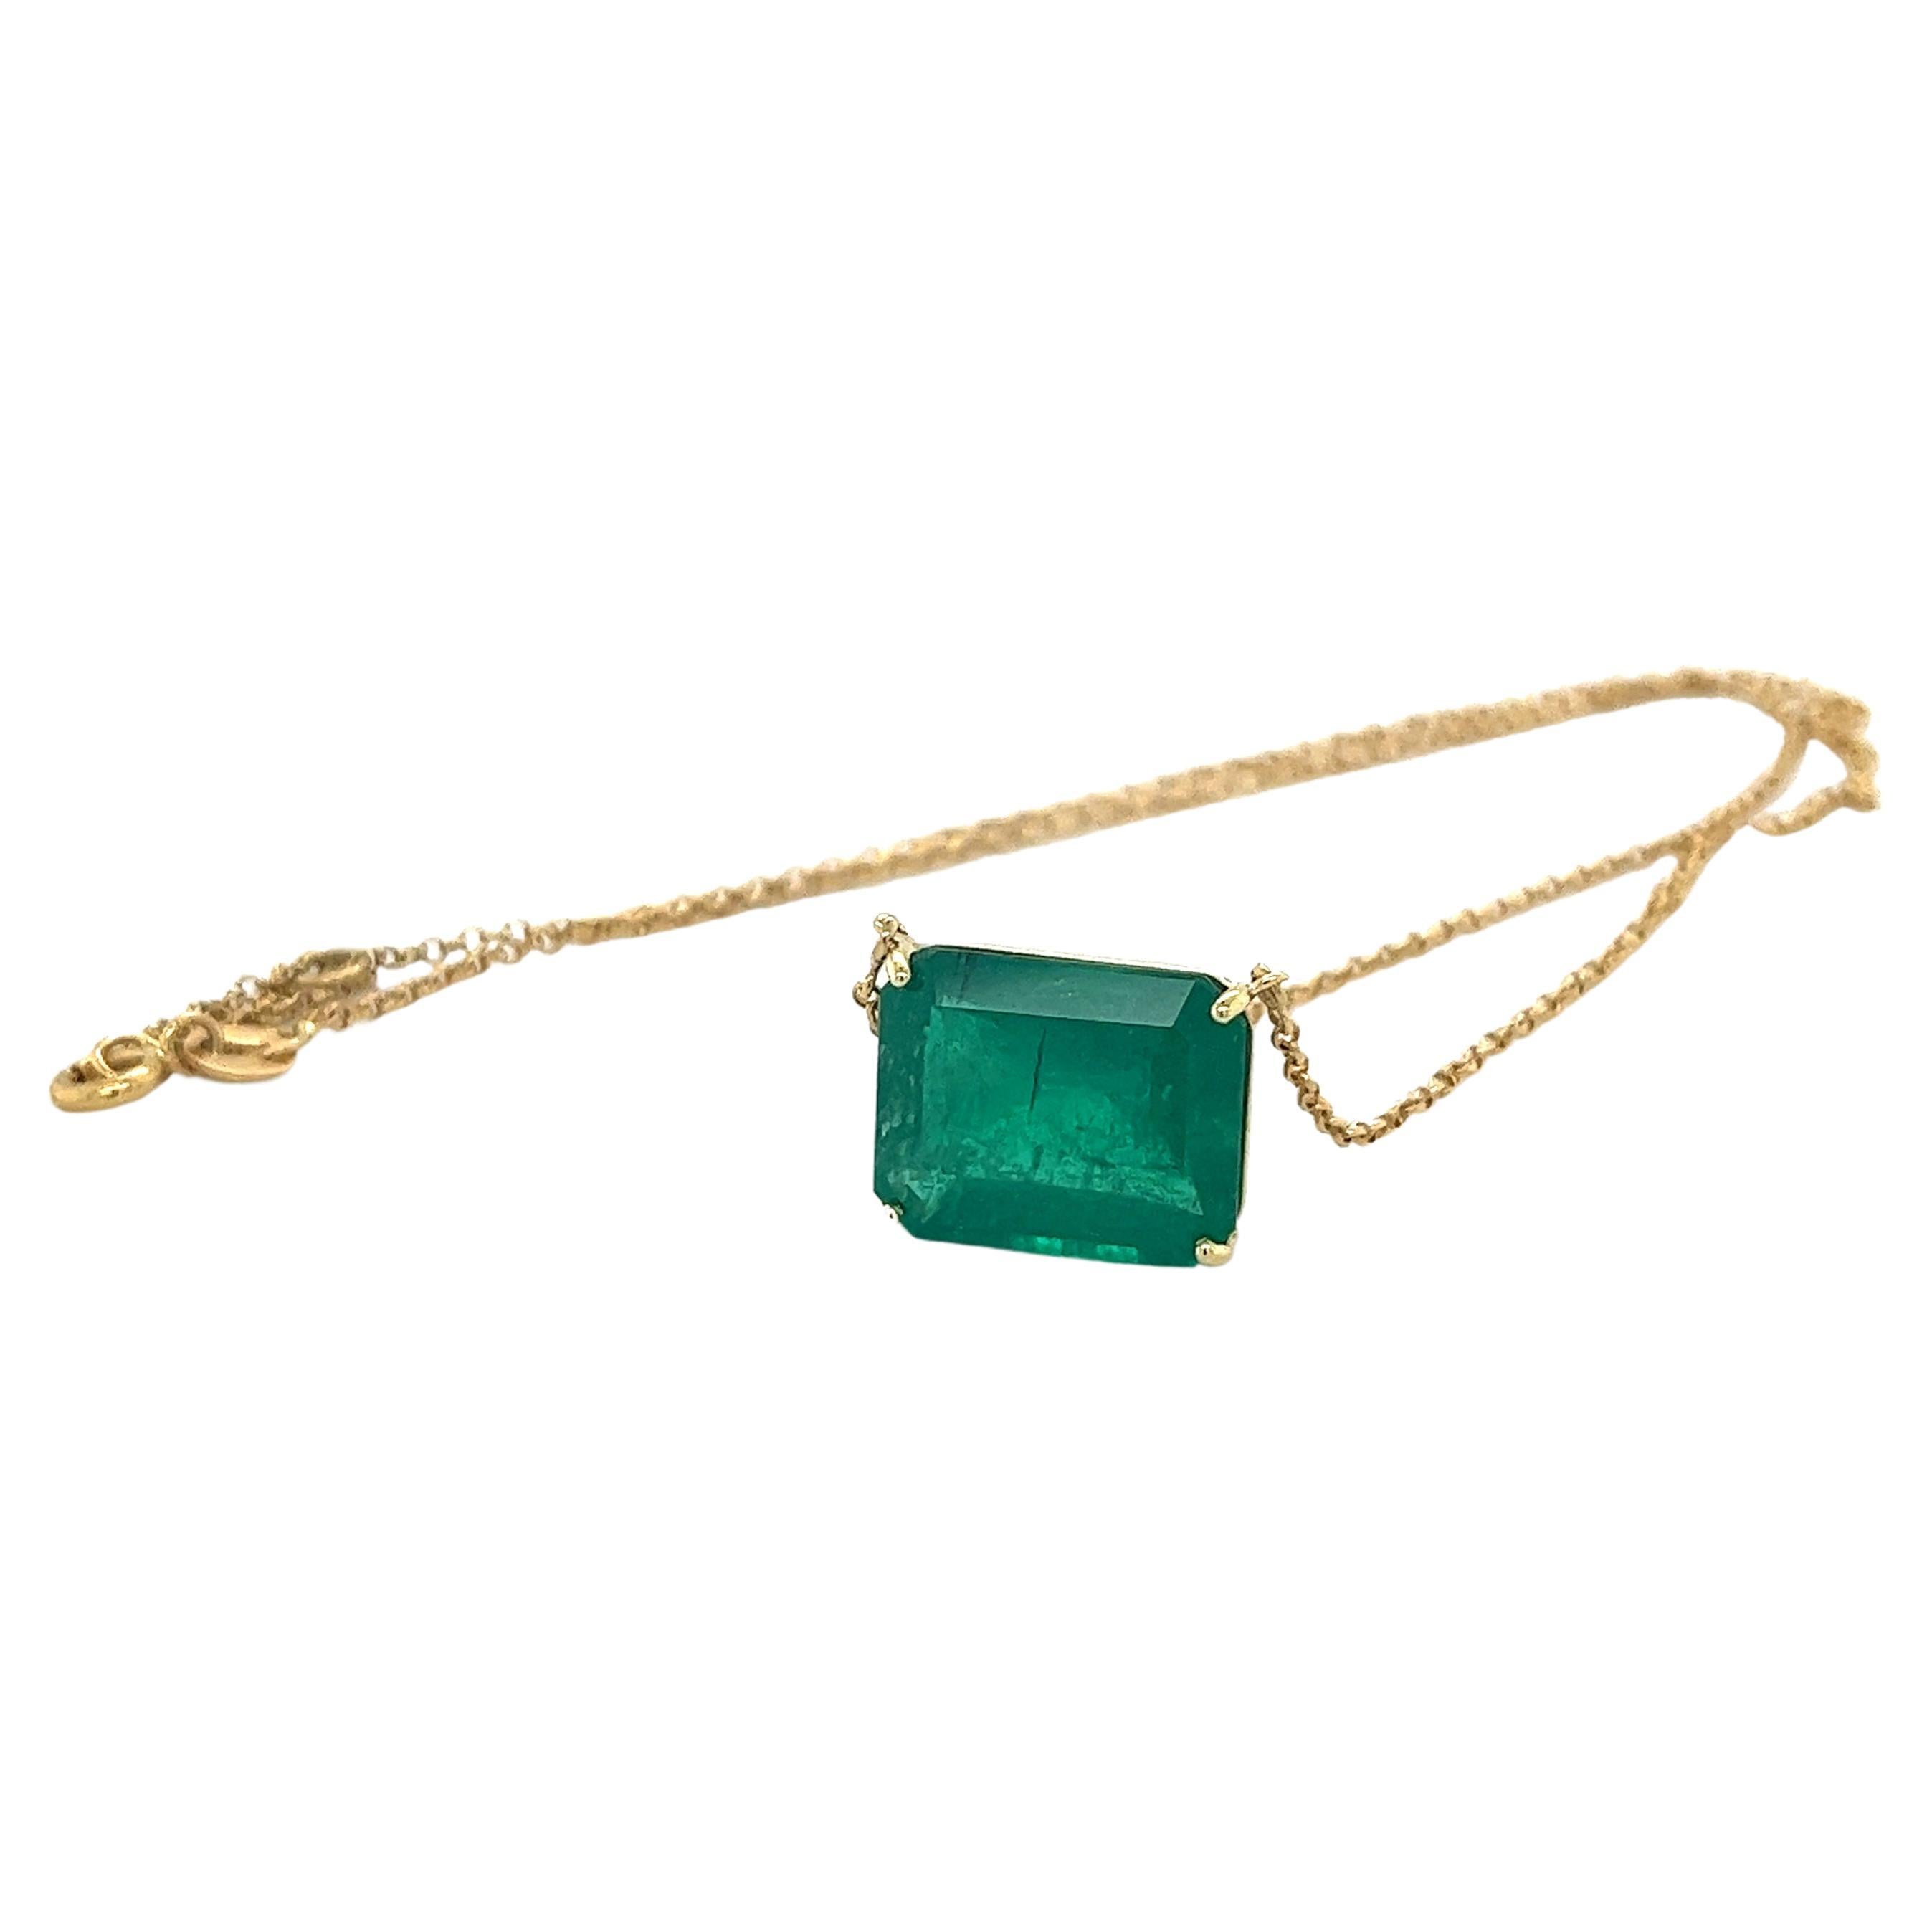 Introducing this Vivid Green Colombian Emerald connecting choker necklace set in 18k solid yellow gold. The pendant seamlessly integrates with the cable chain in what's known as a 'floating' solitaire pendant necklace. The chain necklace features 2